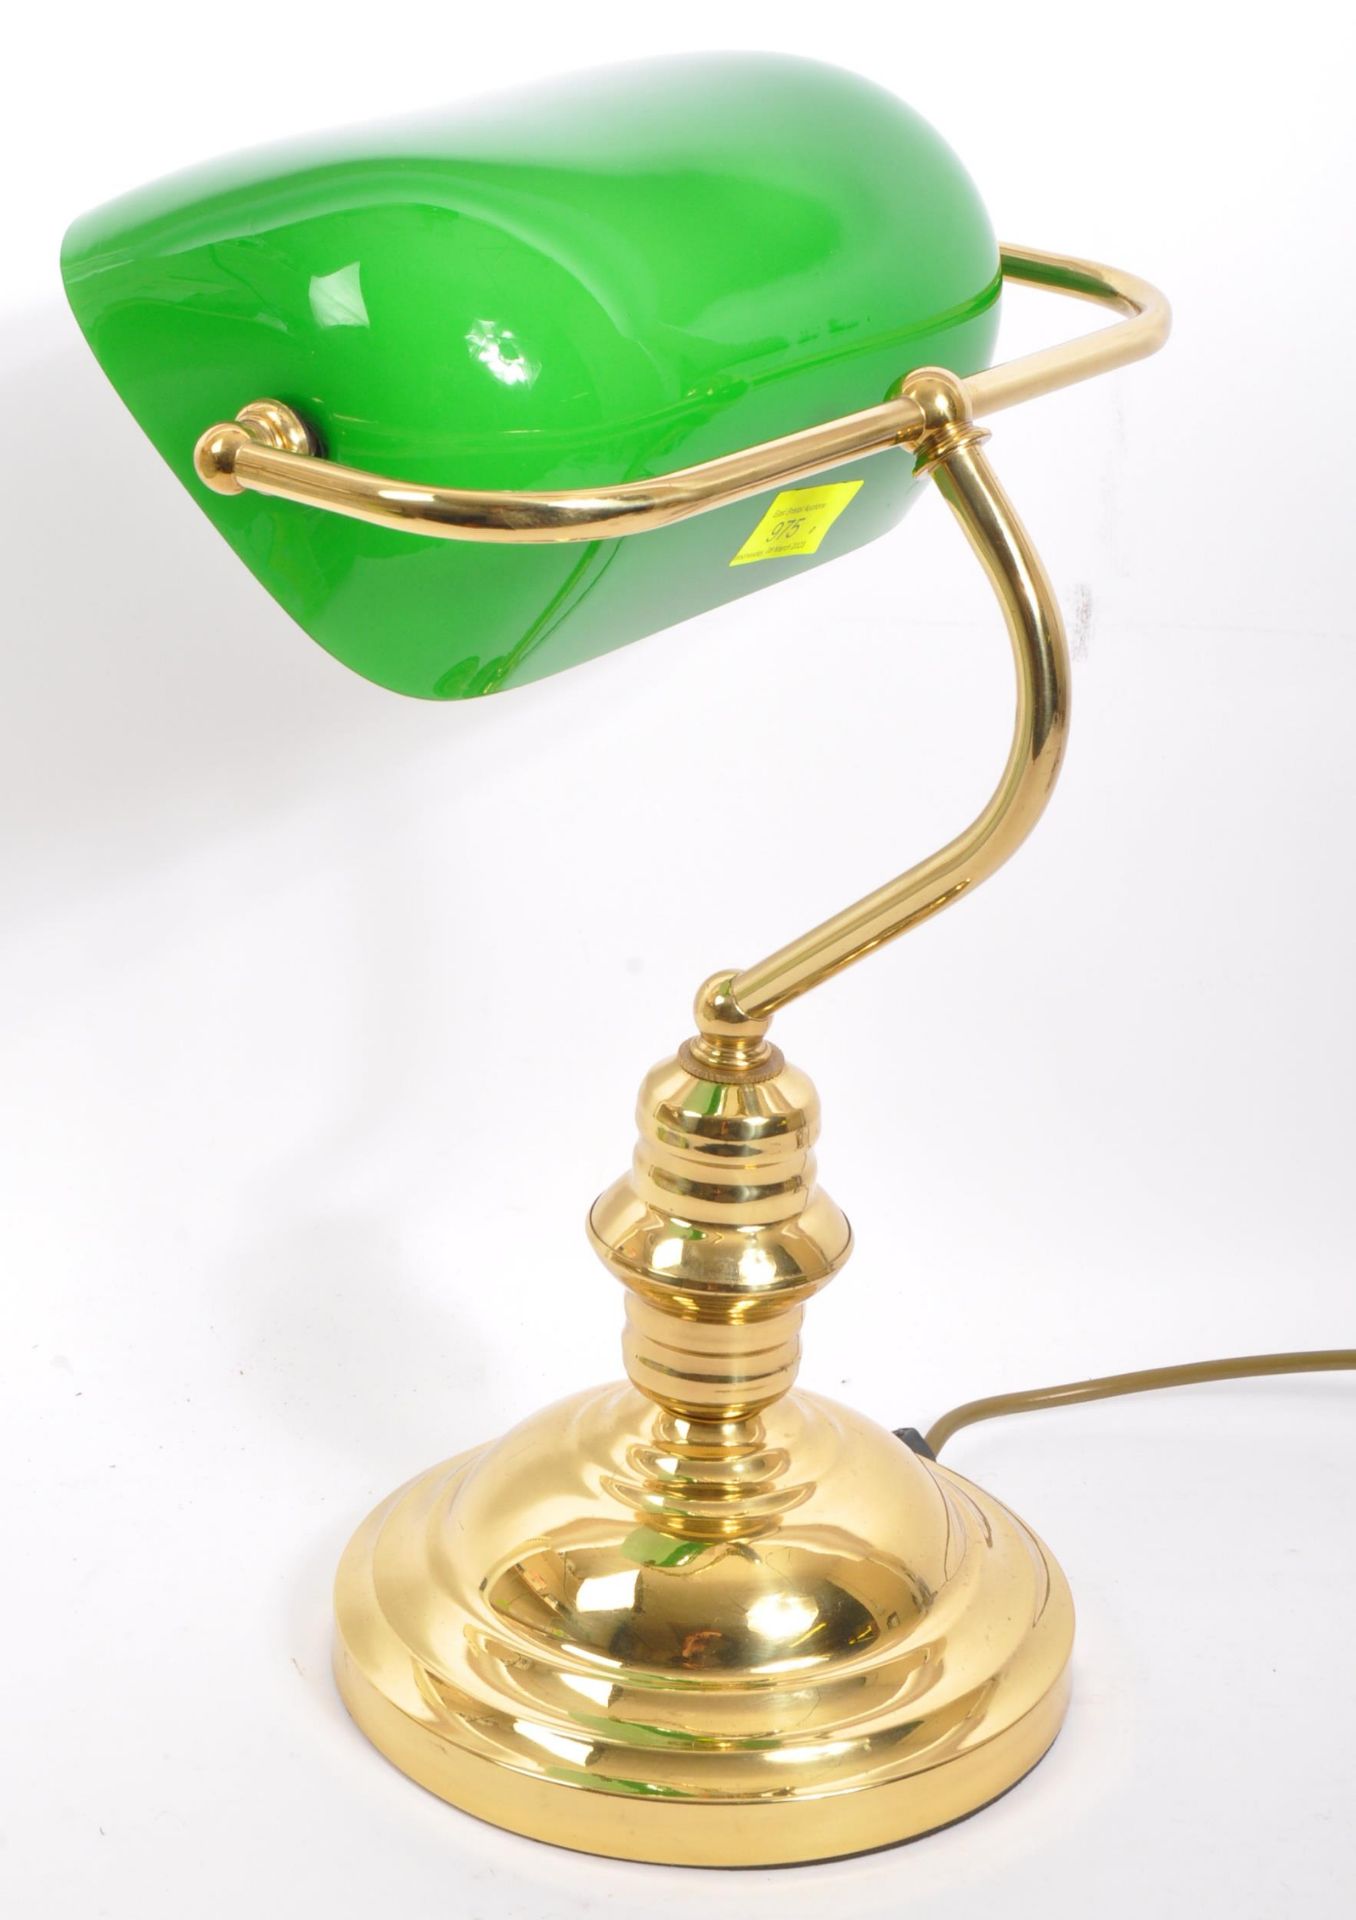 GREEN BANKERS OFFICE TABLE LAMP - 20TH CENTURY CIRCA 1980S - Image 4 of 4